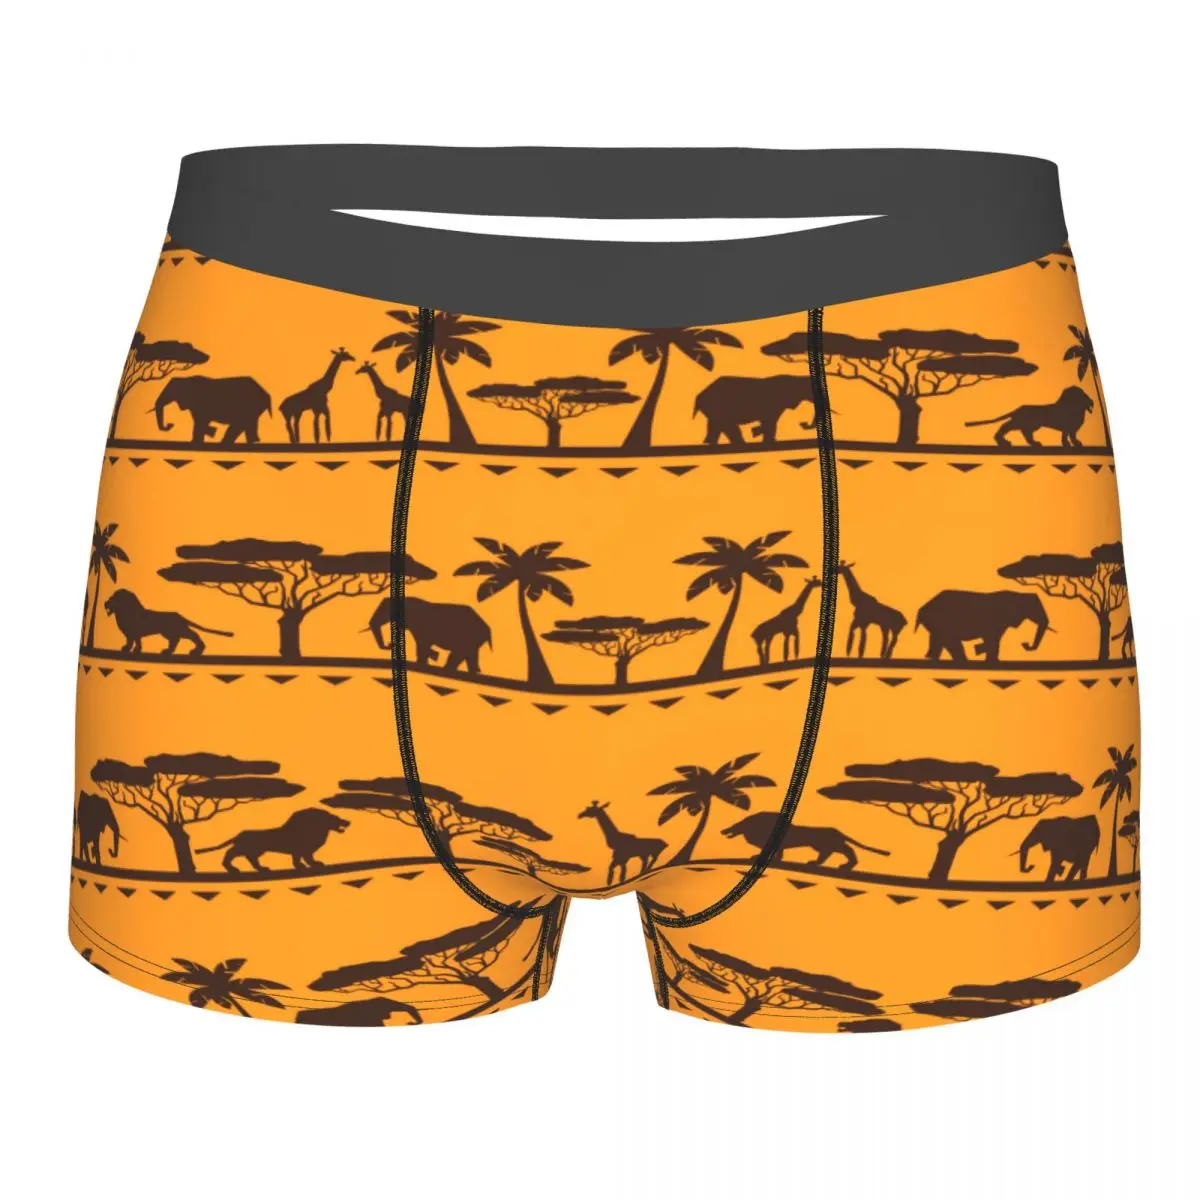 Men's Panties Underpants Boxers Underwear African Ethnic Animal Pattern Sexy Male Shorts